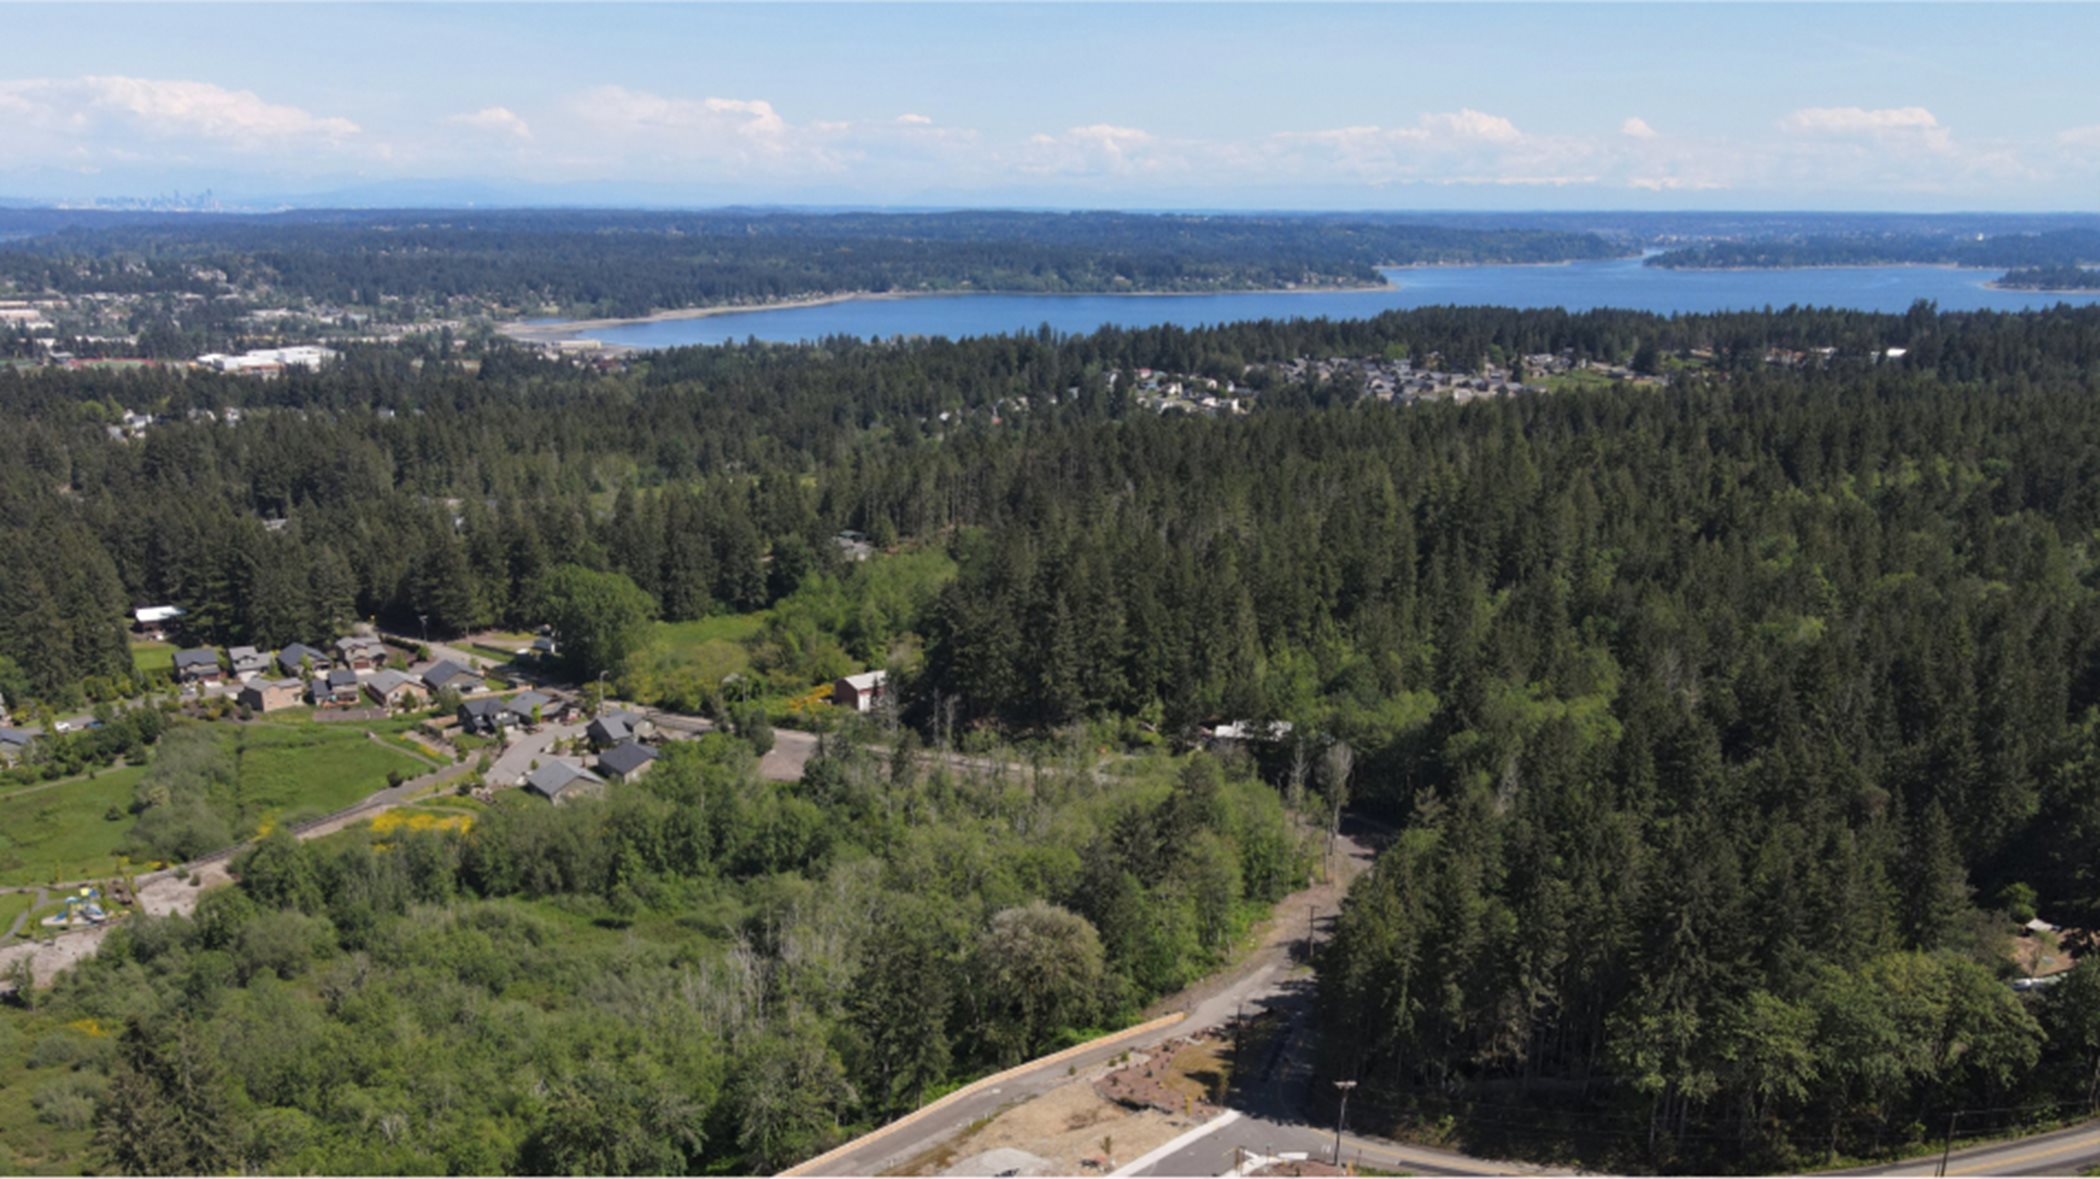 Aerial view of the community with lots of evergreen trees